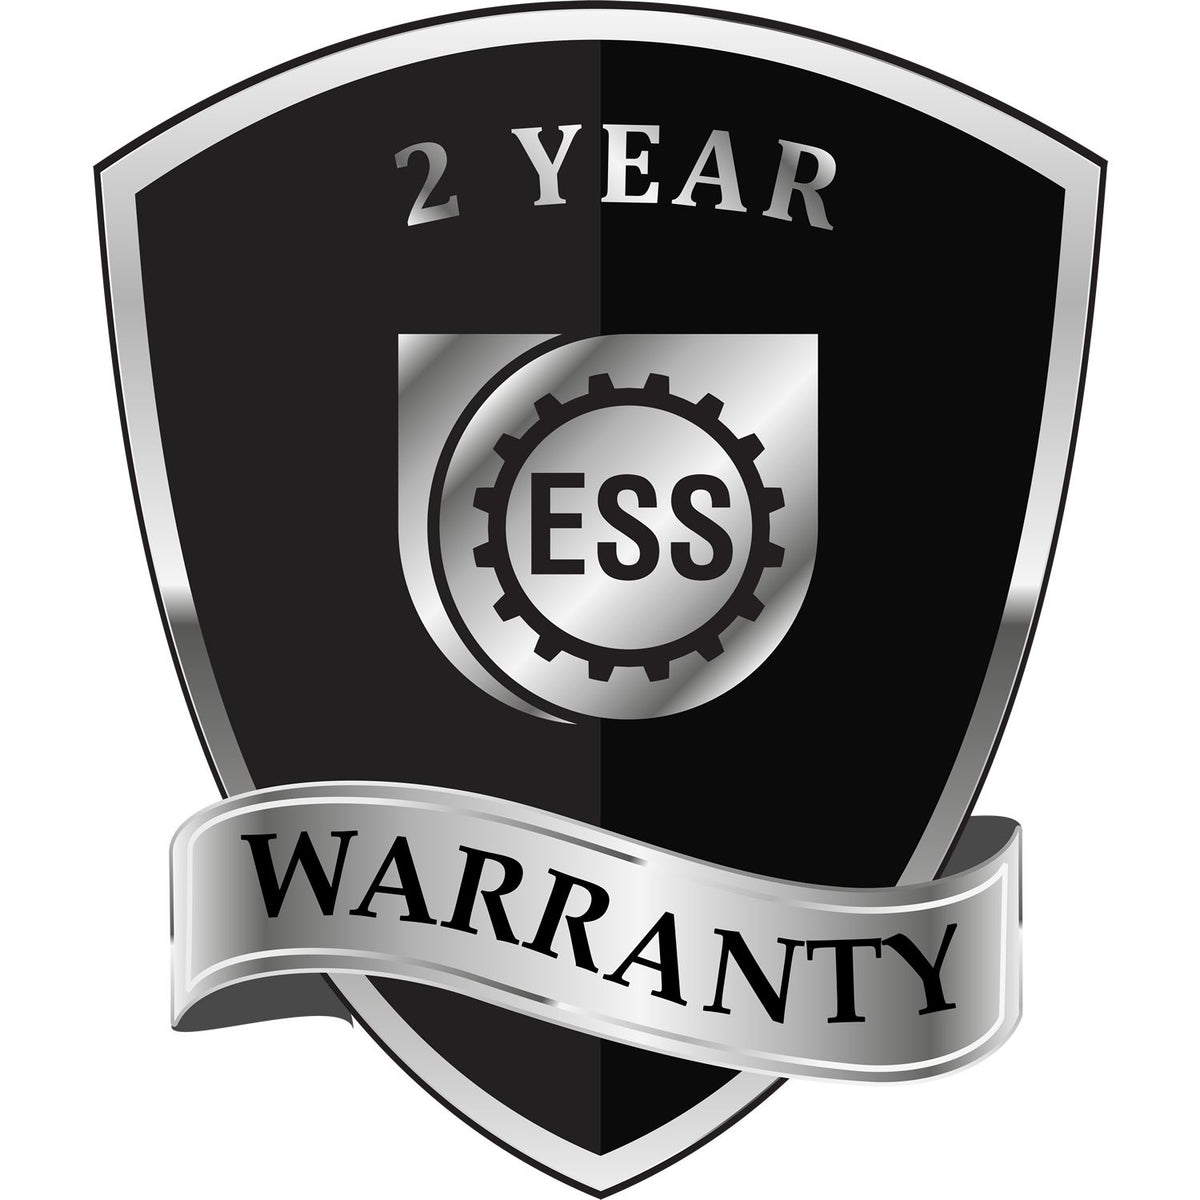 A black and silver badge or emblem showing warranty information for the Hybrid Wyoming Geologist Seal